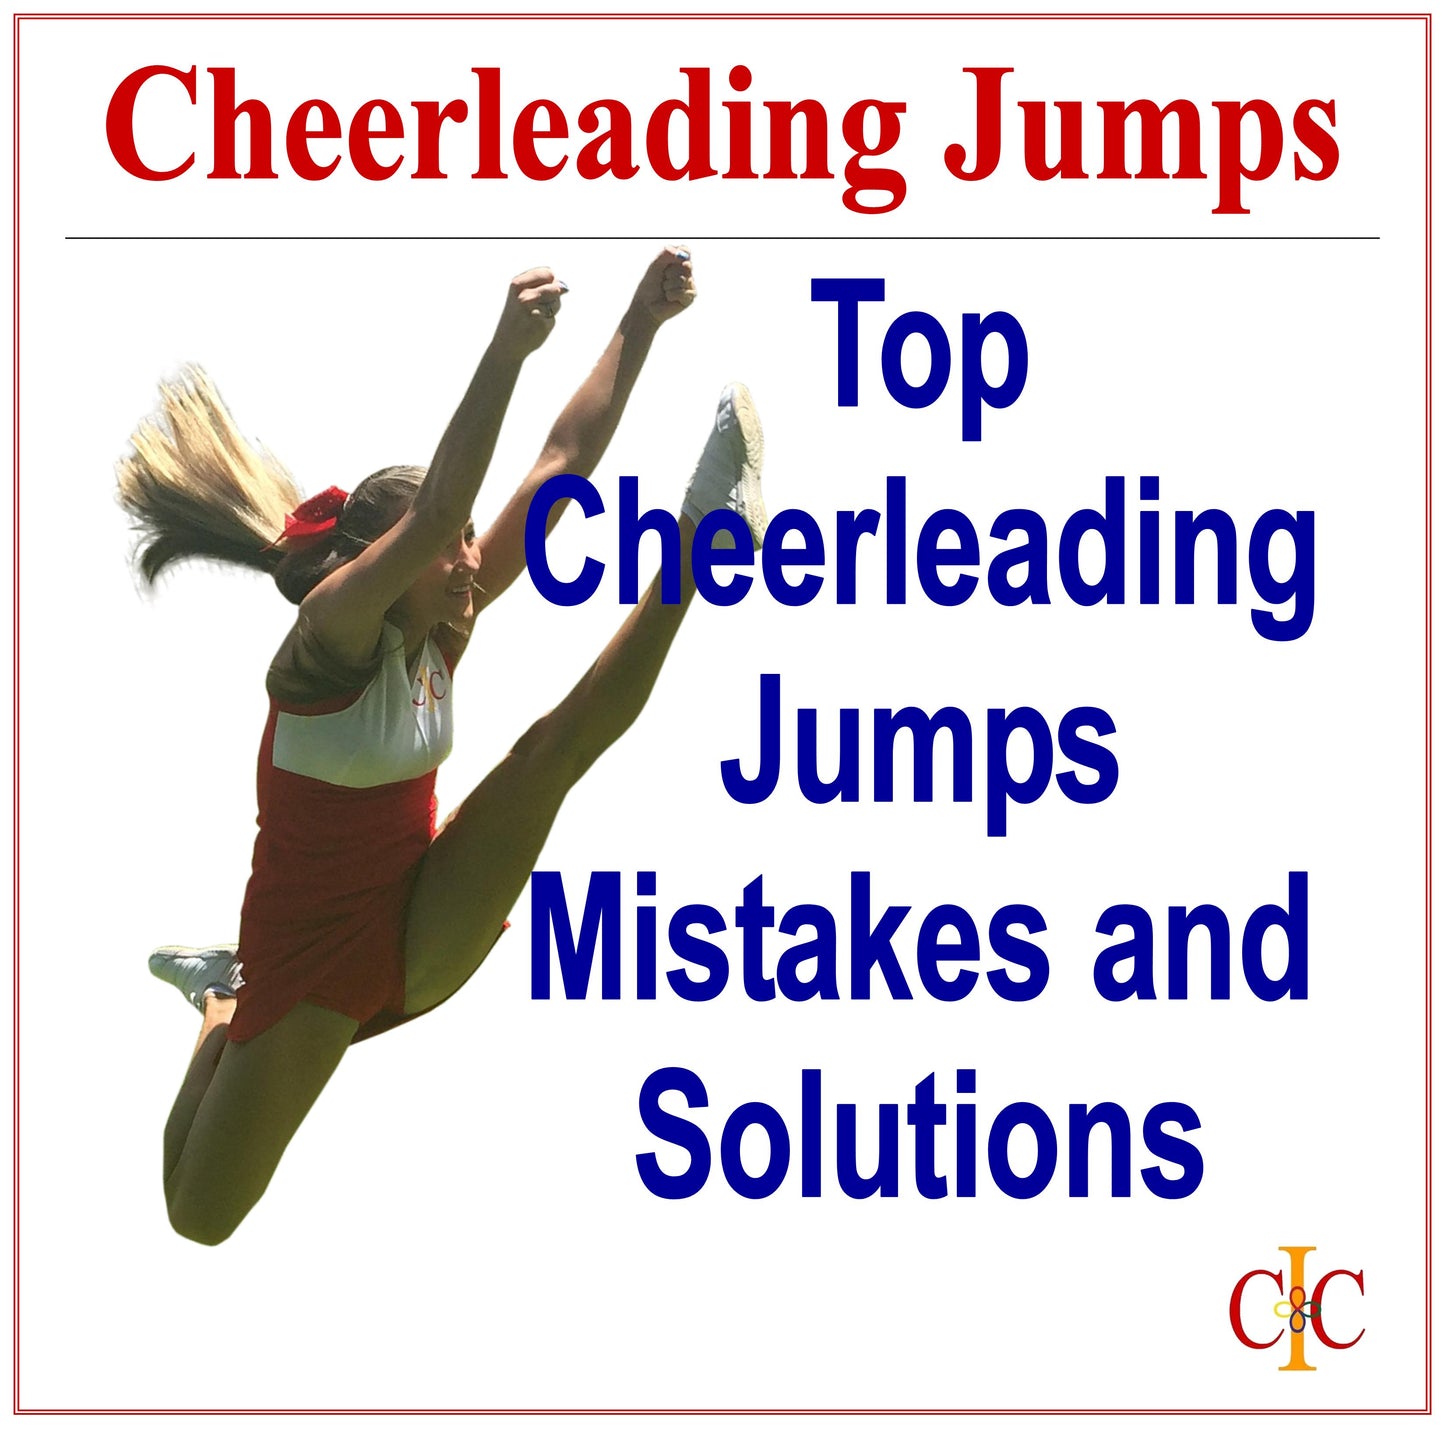 How to Improve Your Cheerleading Jumps - Top Jump Mistakes and Solutions